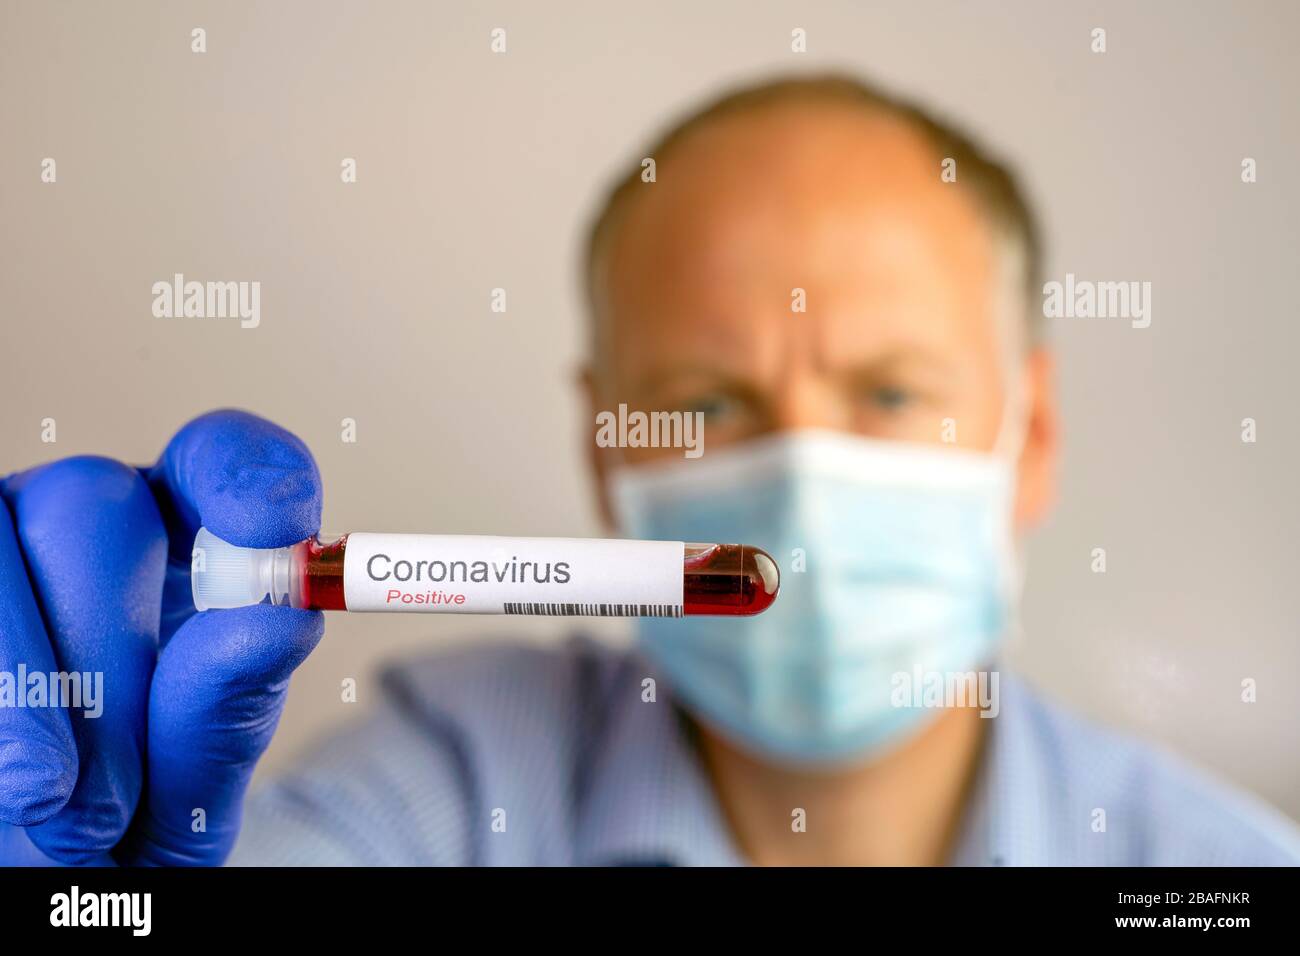 A serious man wearing protective mask and showing positive result of his coronavirus test. Stock Photo